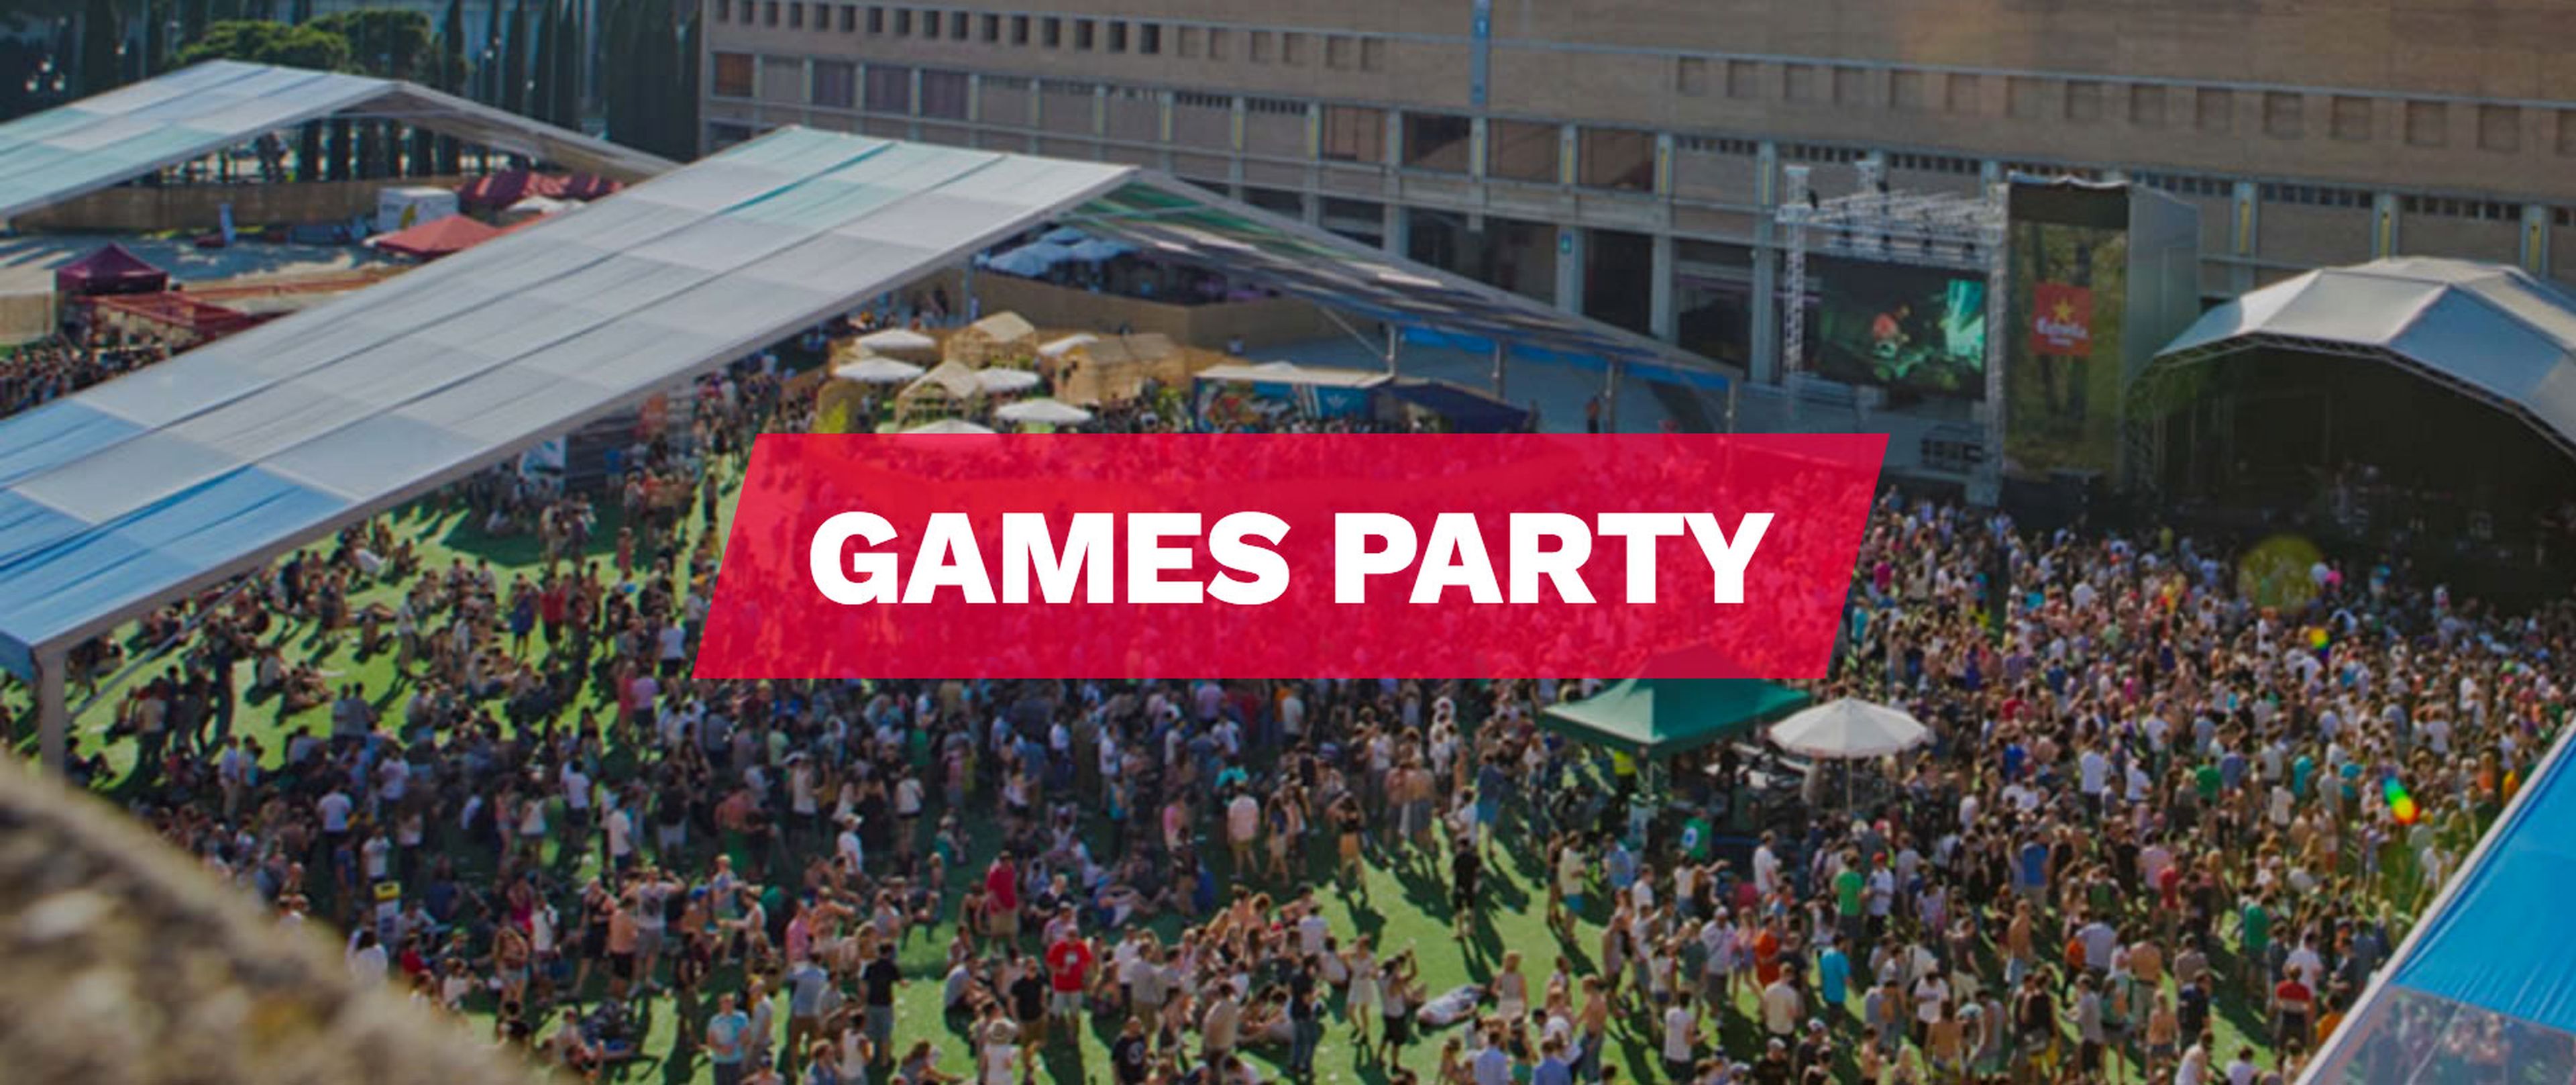 Barcelona Games World Zona Games Party